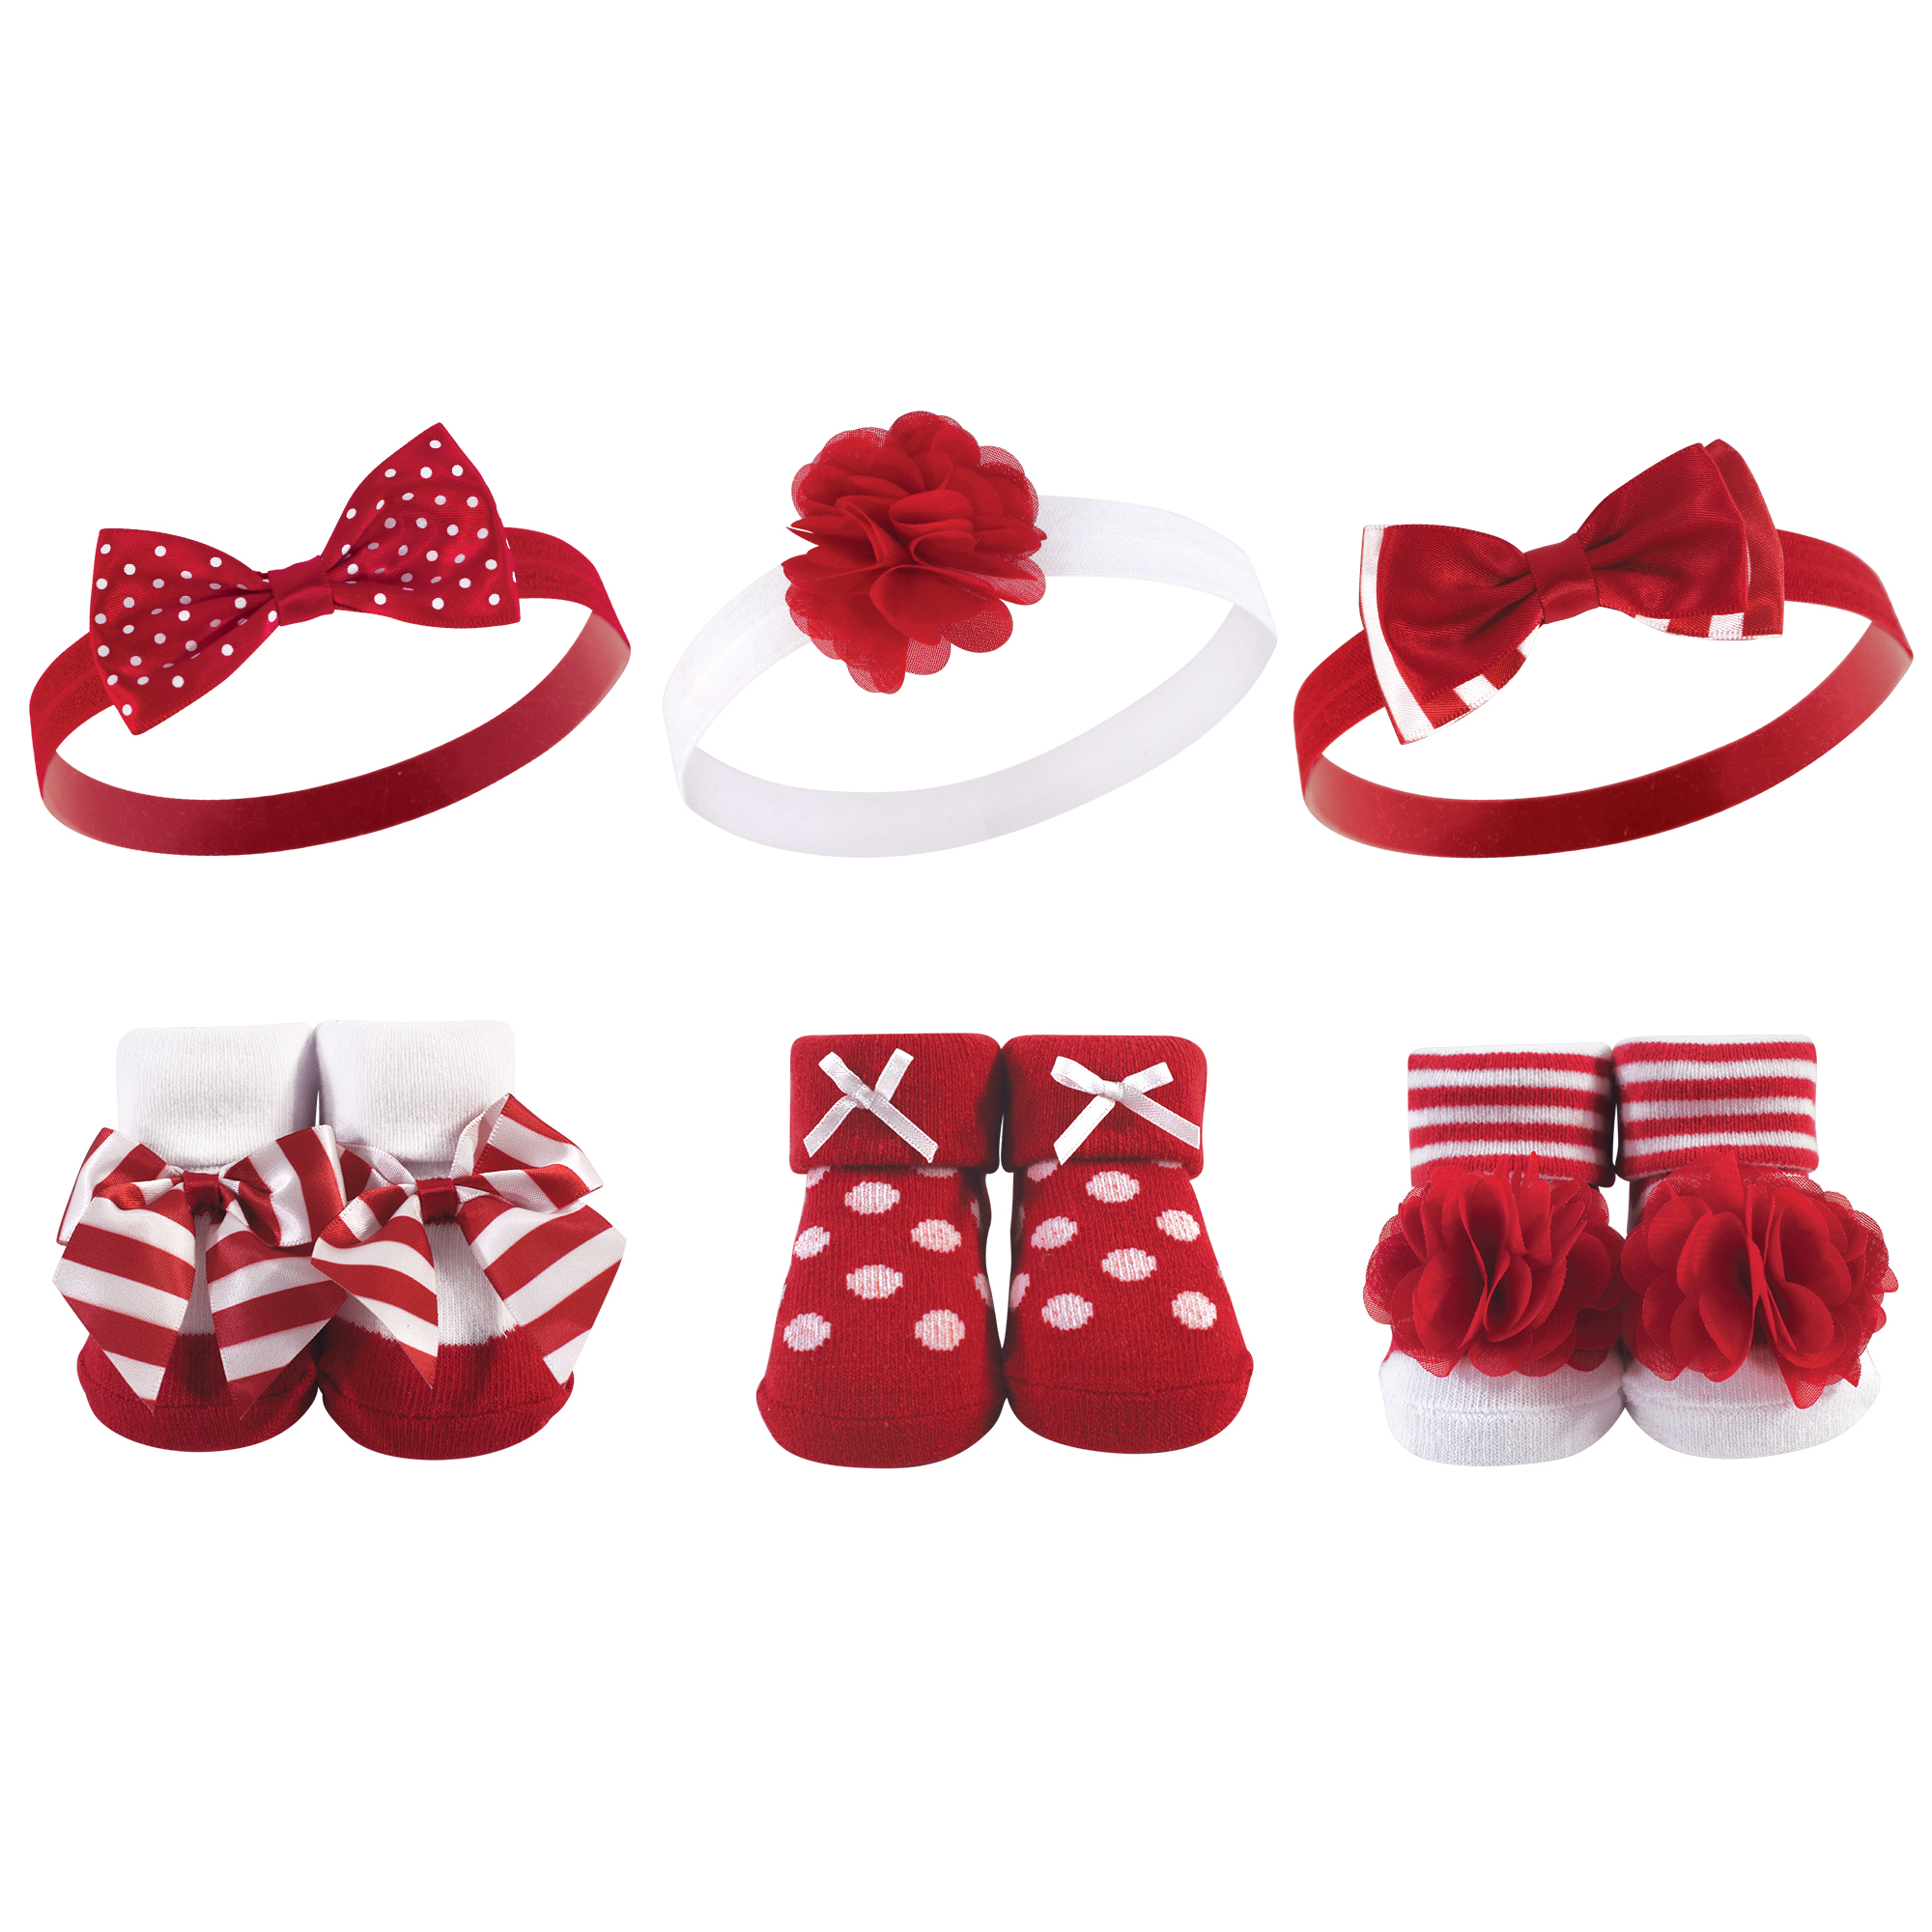 Hudson Baby Socks and Headband Giftset, Red and White Stripe 6-Piece ...